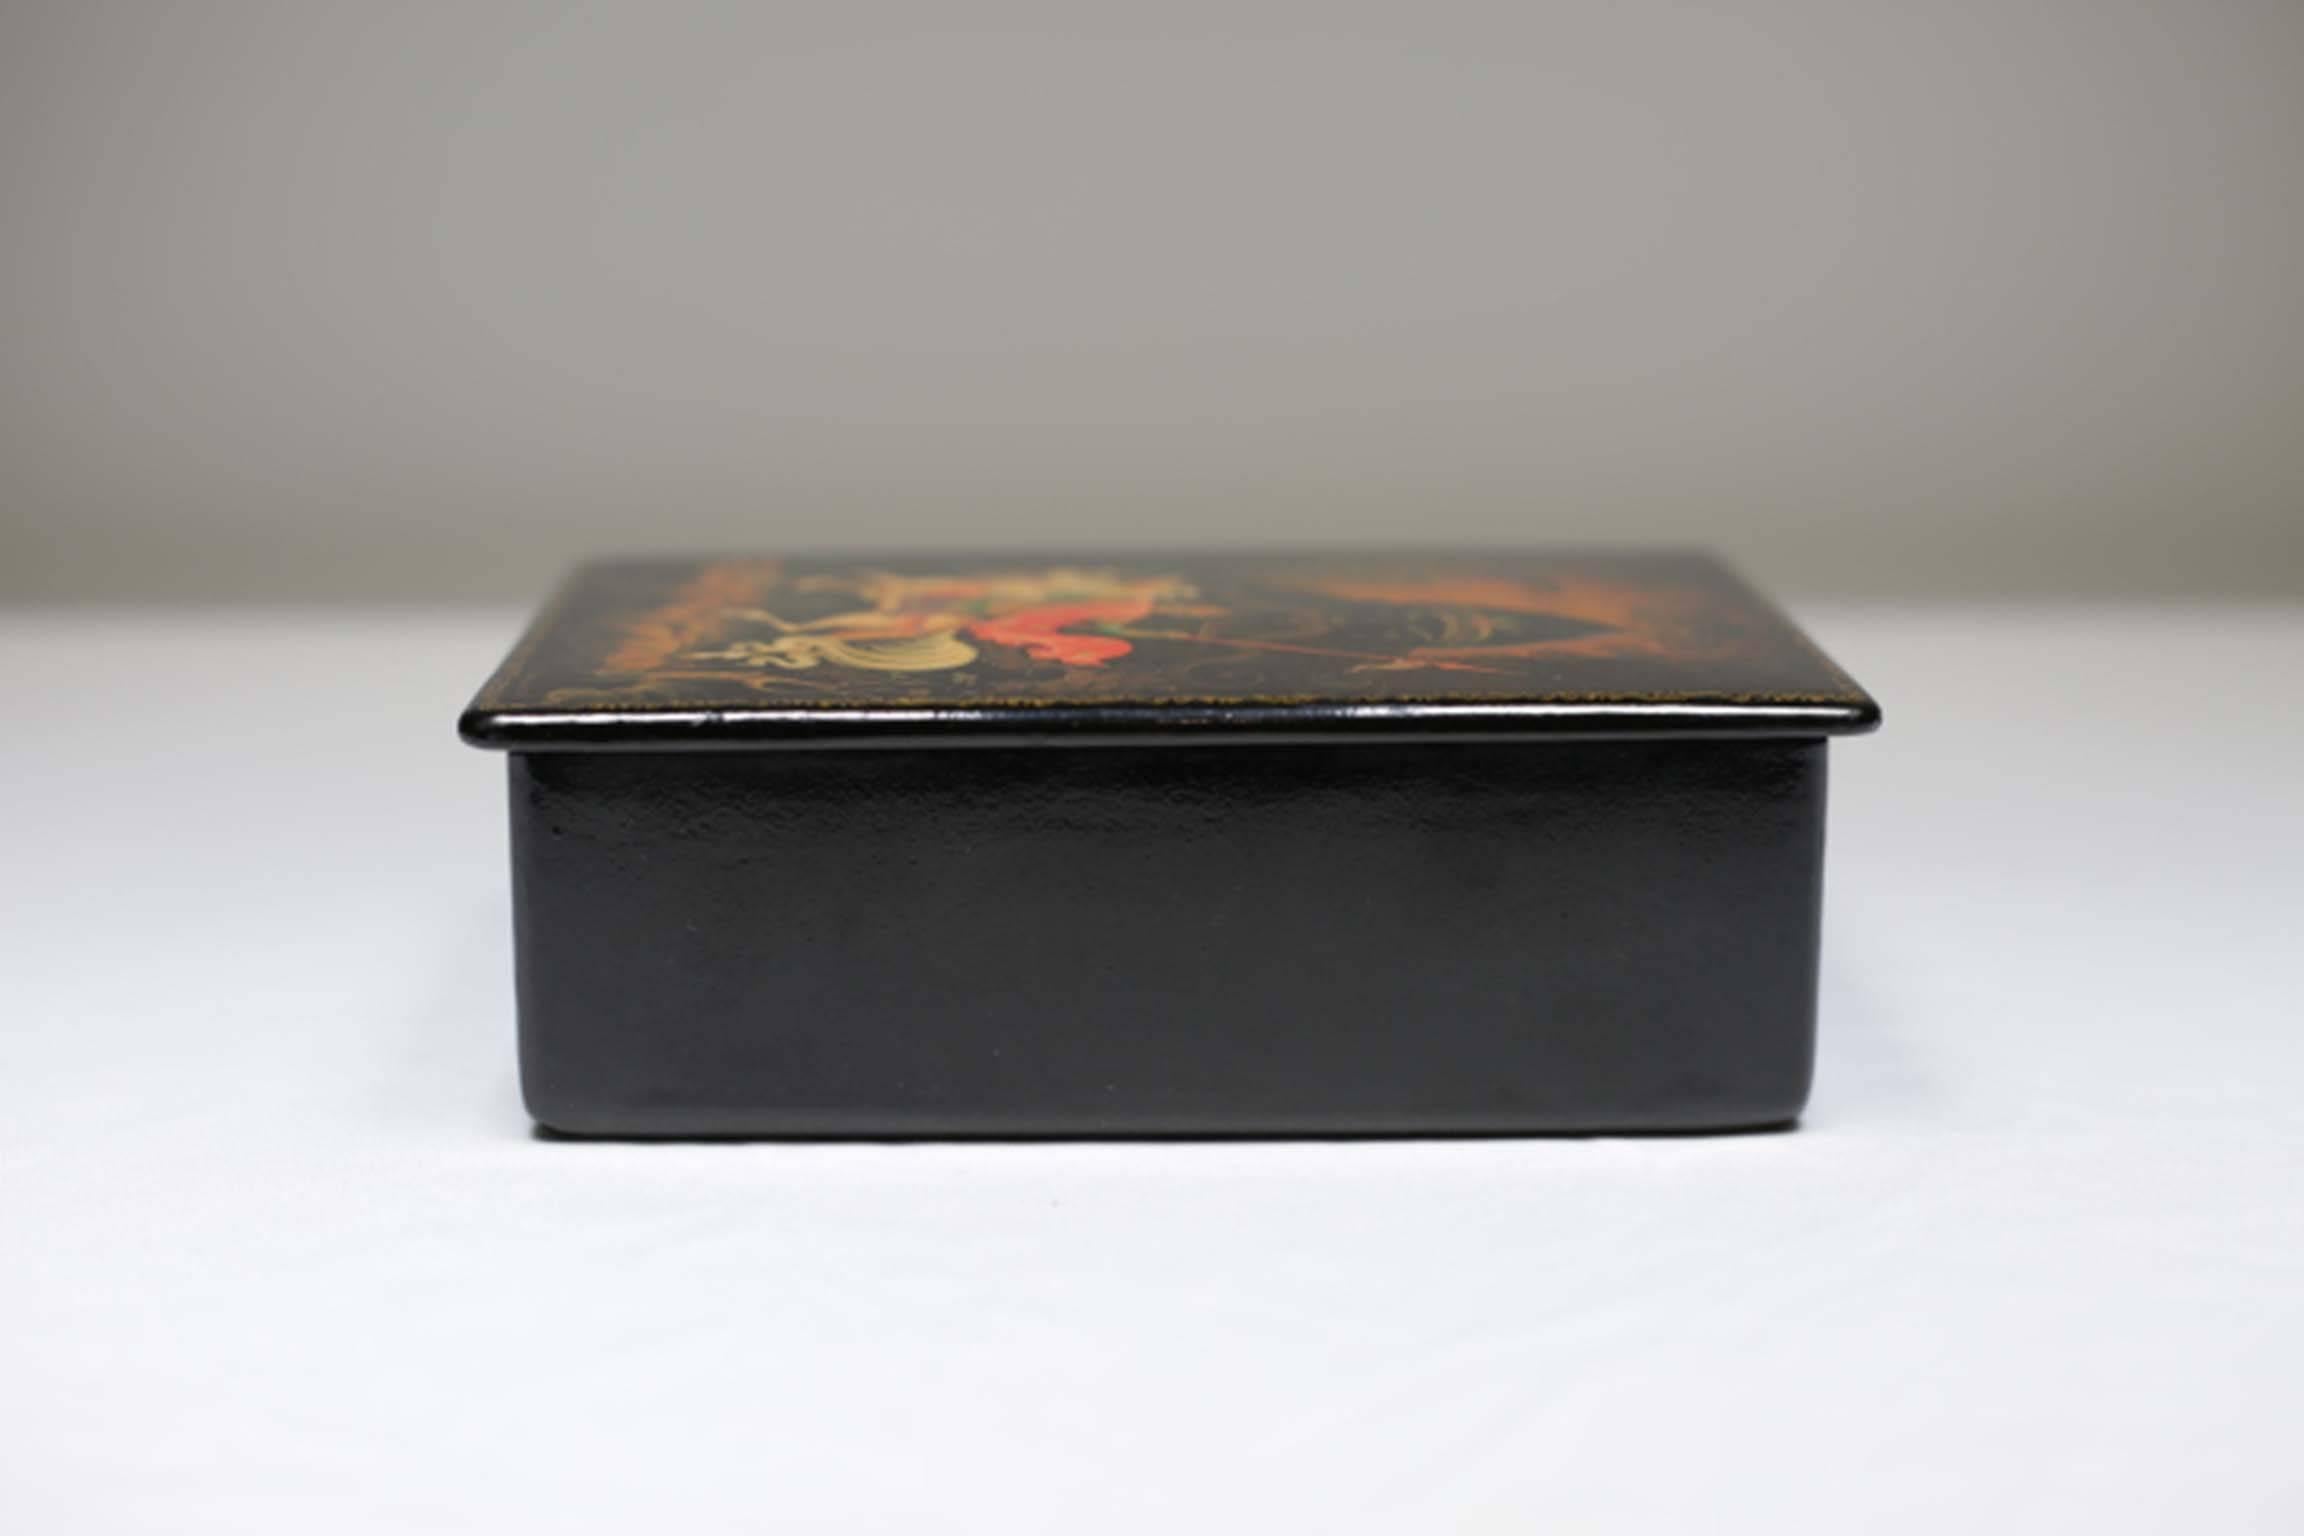 Russian Hand-Painted Lacquered Box from the U.S.S.R. Signed by Artist, circa 1970-1980